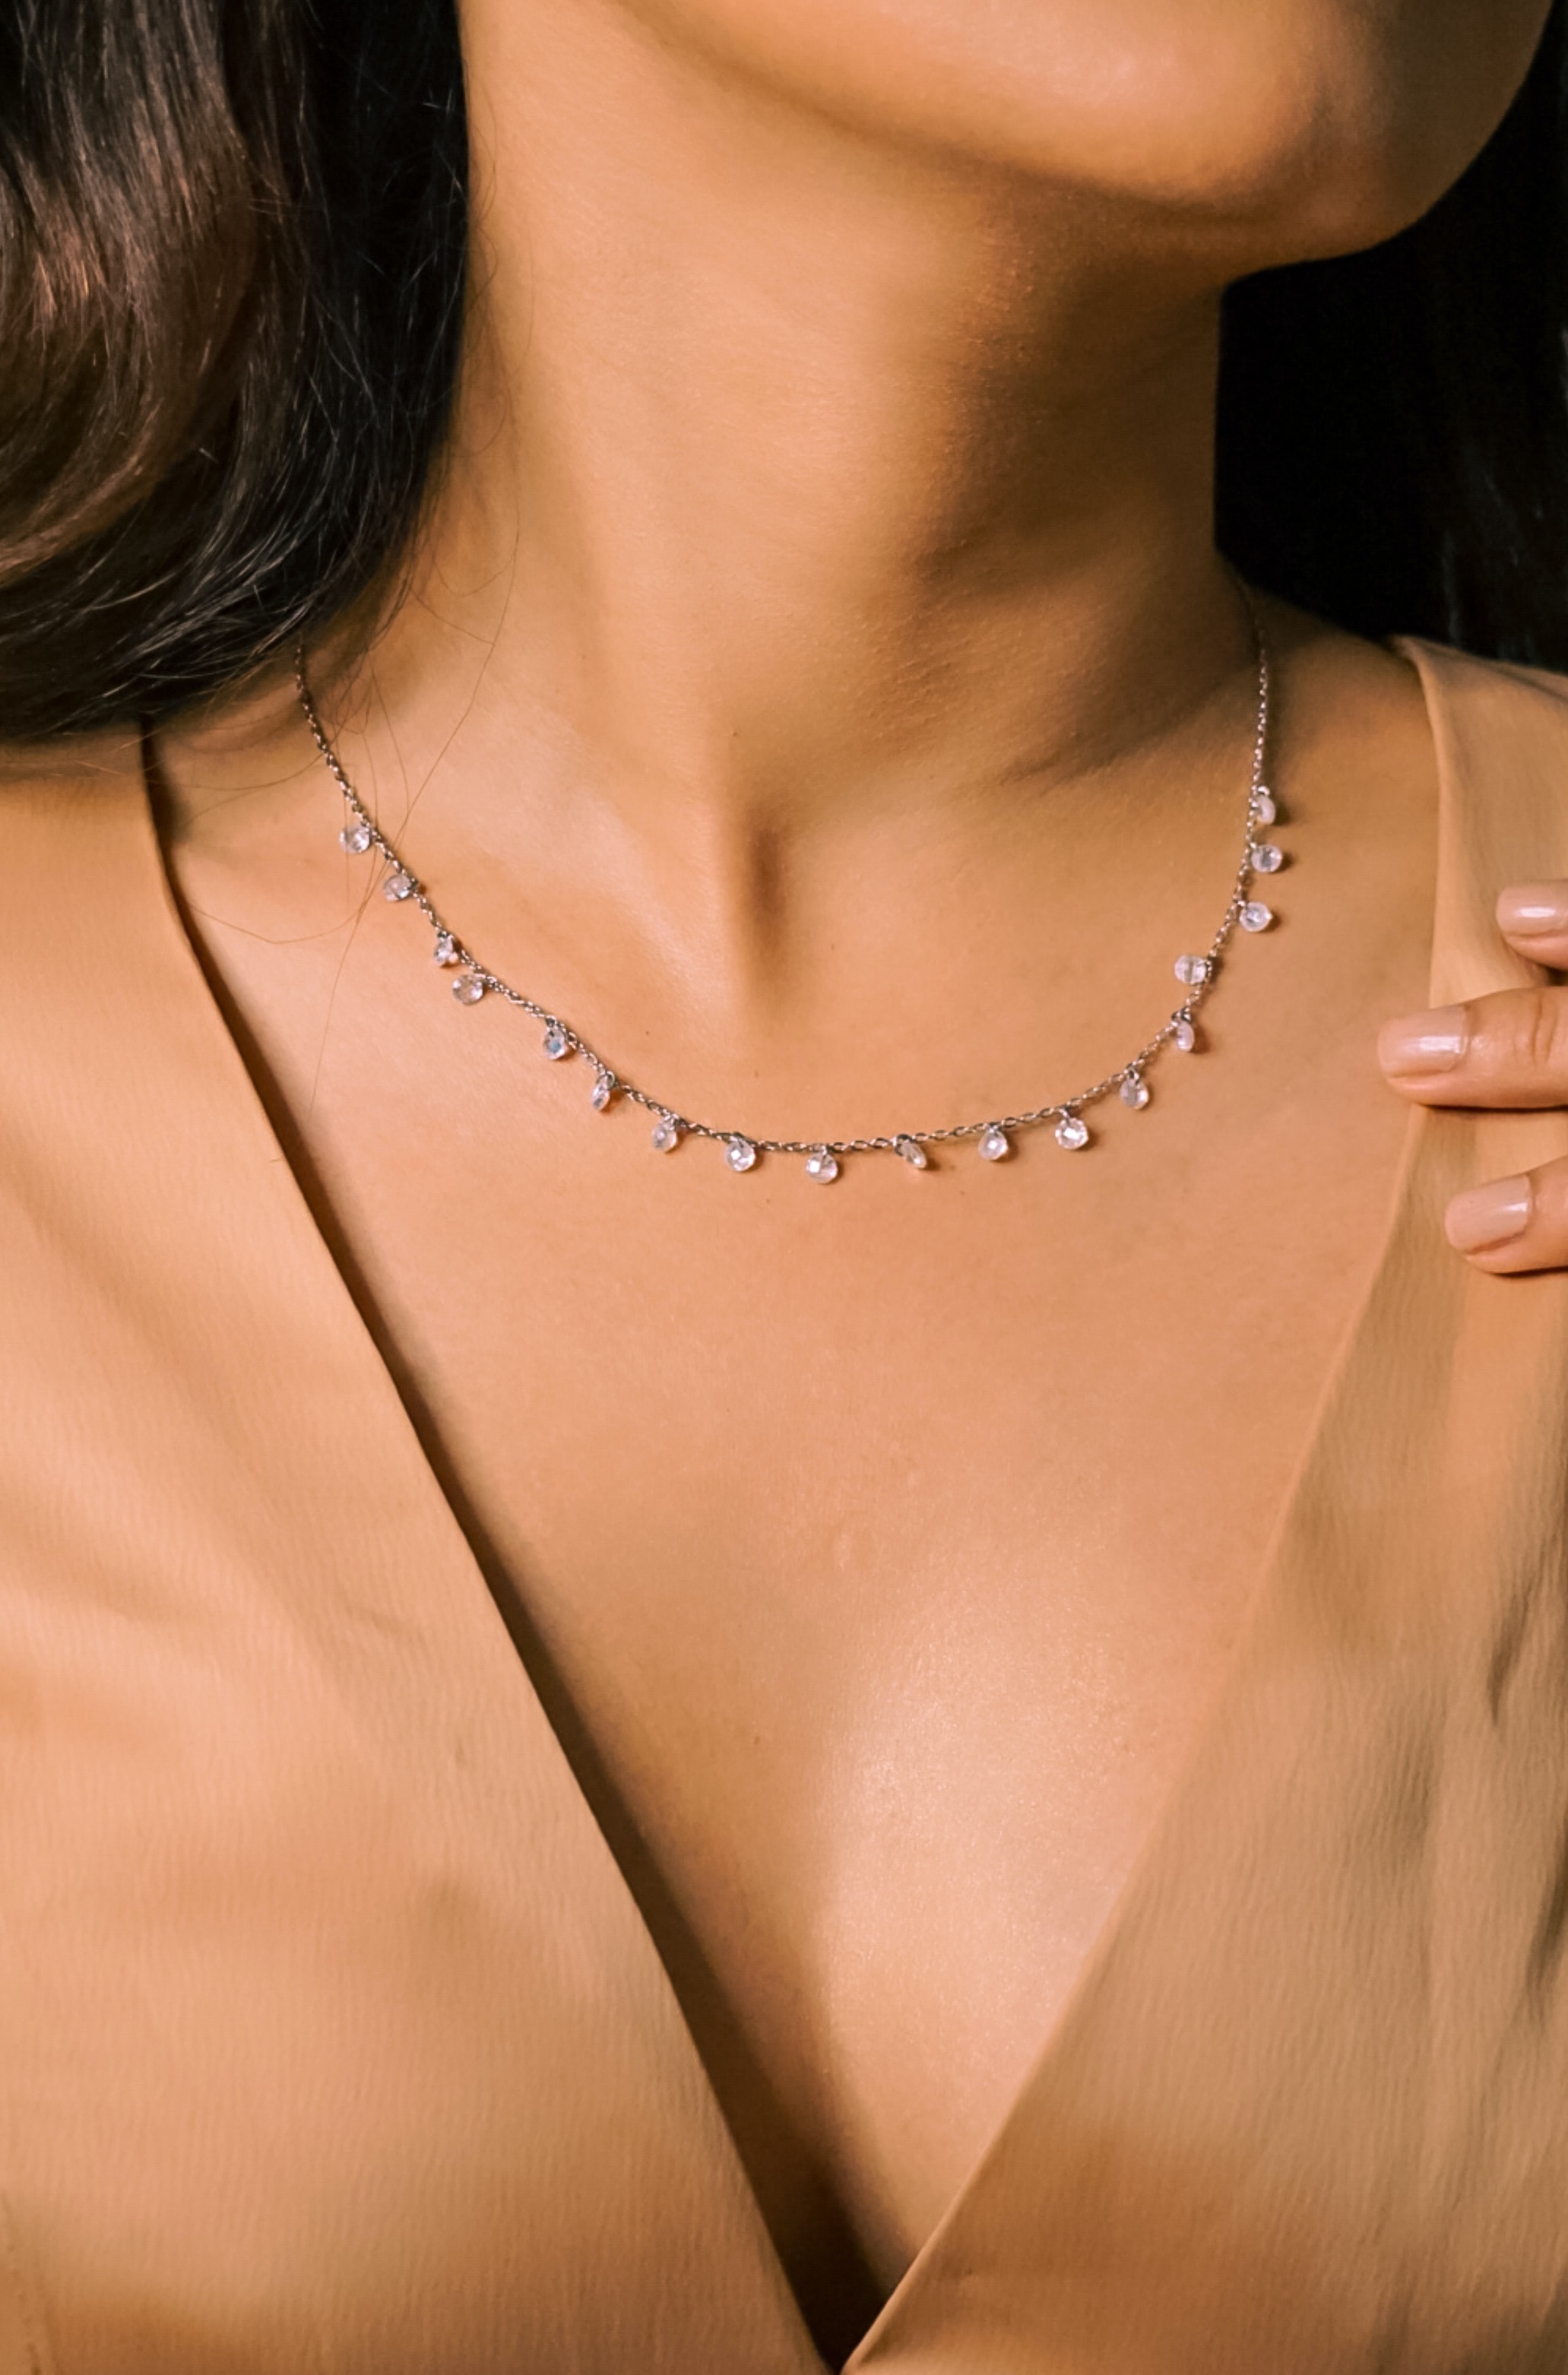 Long Live the Necklace: Why the No Necklace Trend is Already Over